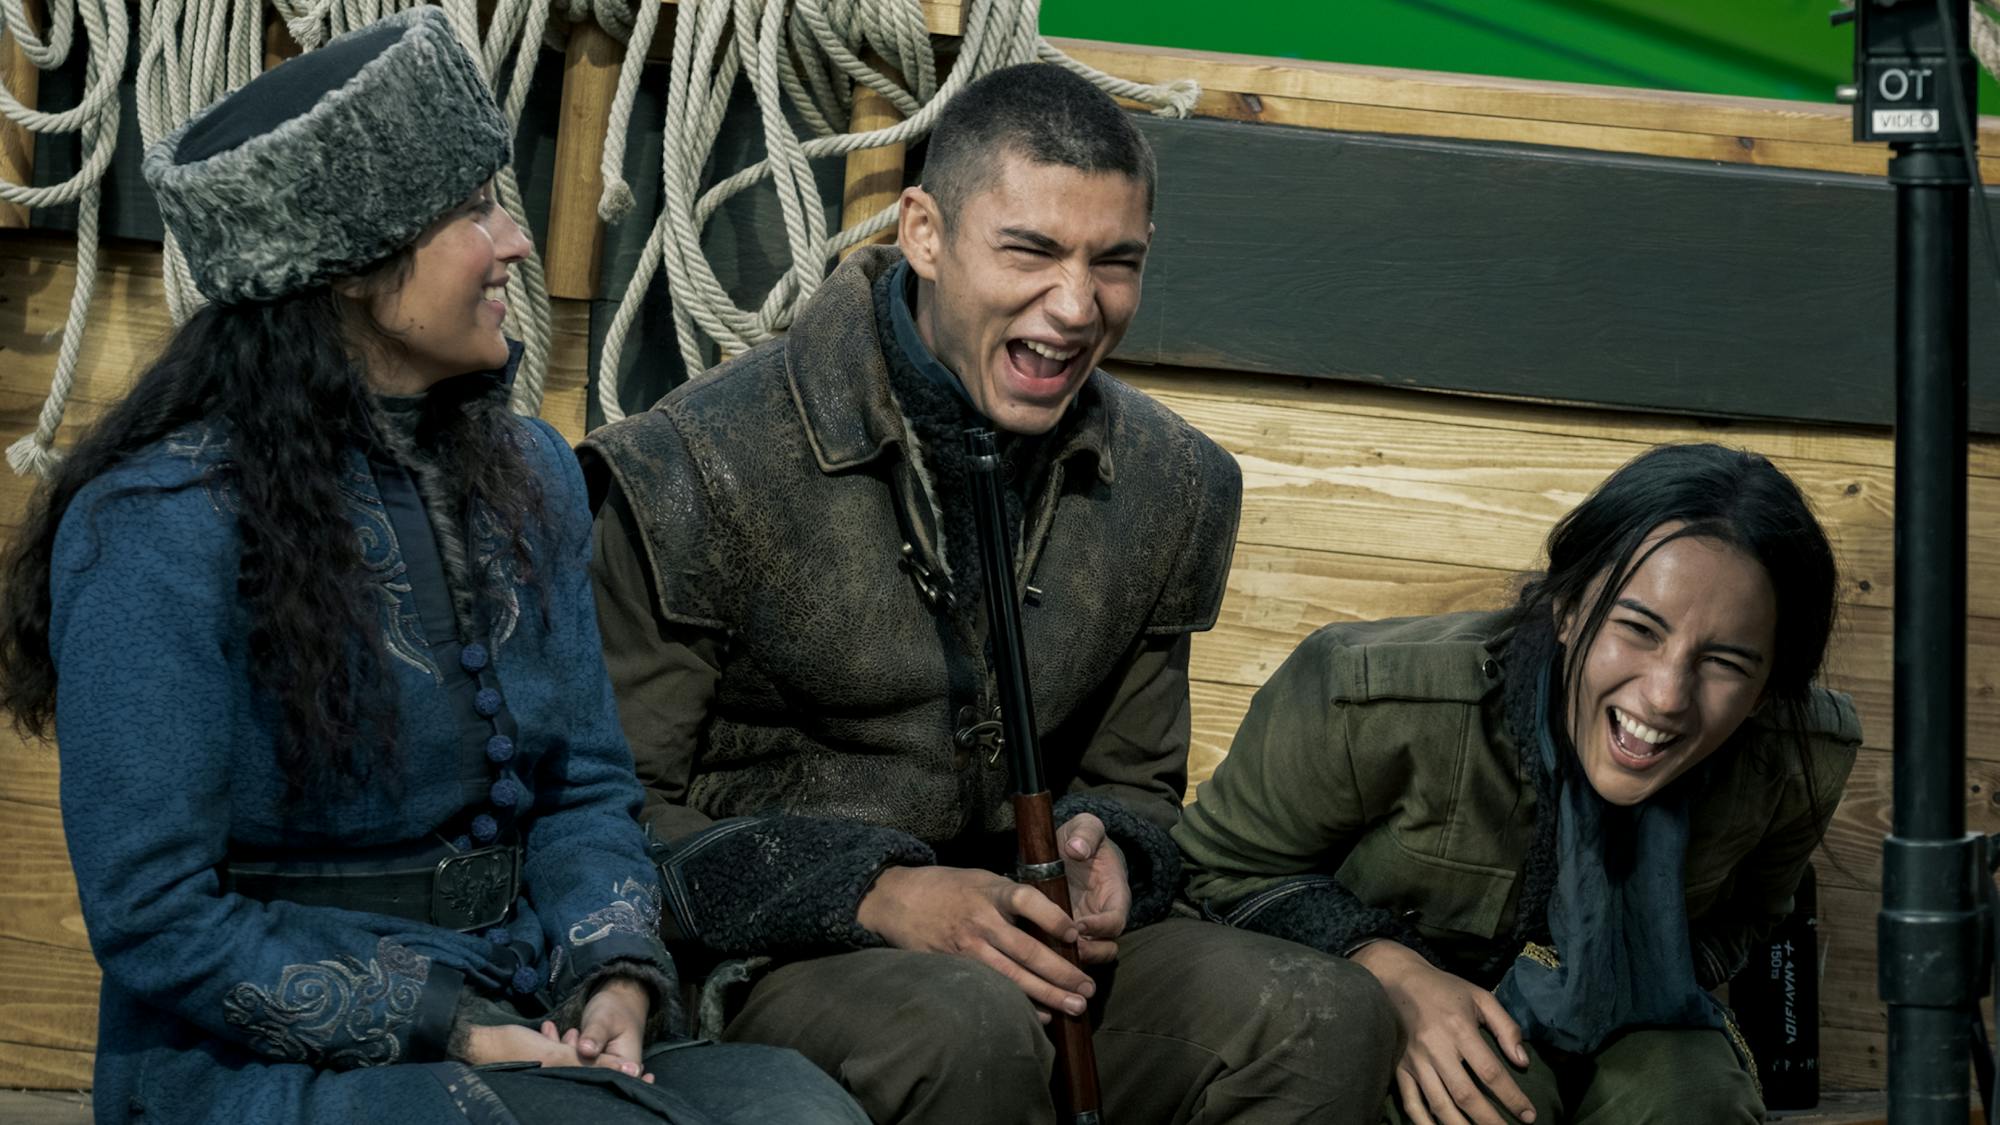 Sujaya Dasgupta, Archie Renaux, and Alina Starkov sit together. Dasgupta wears a blue jacket and fur hat. Renaux wears a brown jacket and carries a gun. Mei Li wears a blue scarf and green jacket. All three are laughing uproariously.